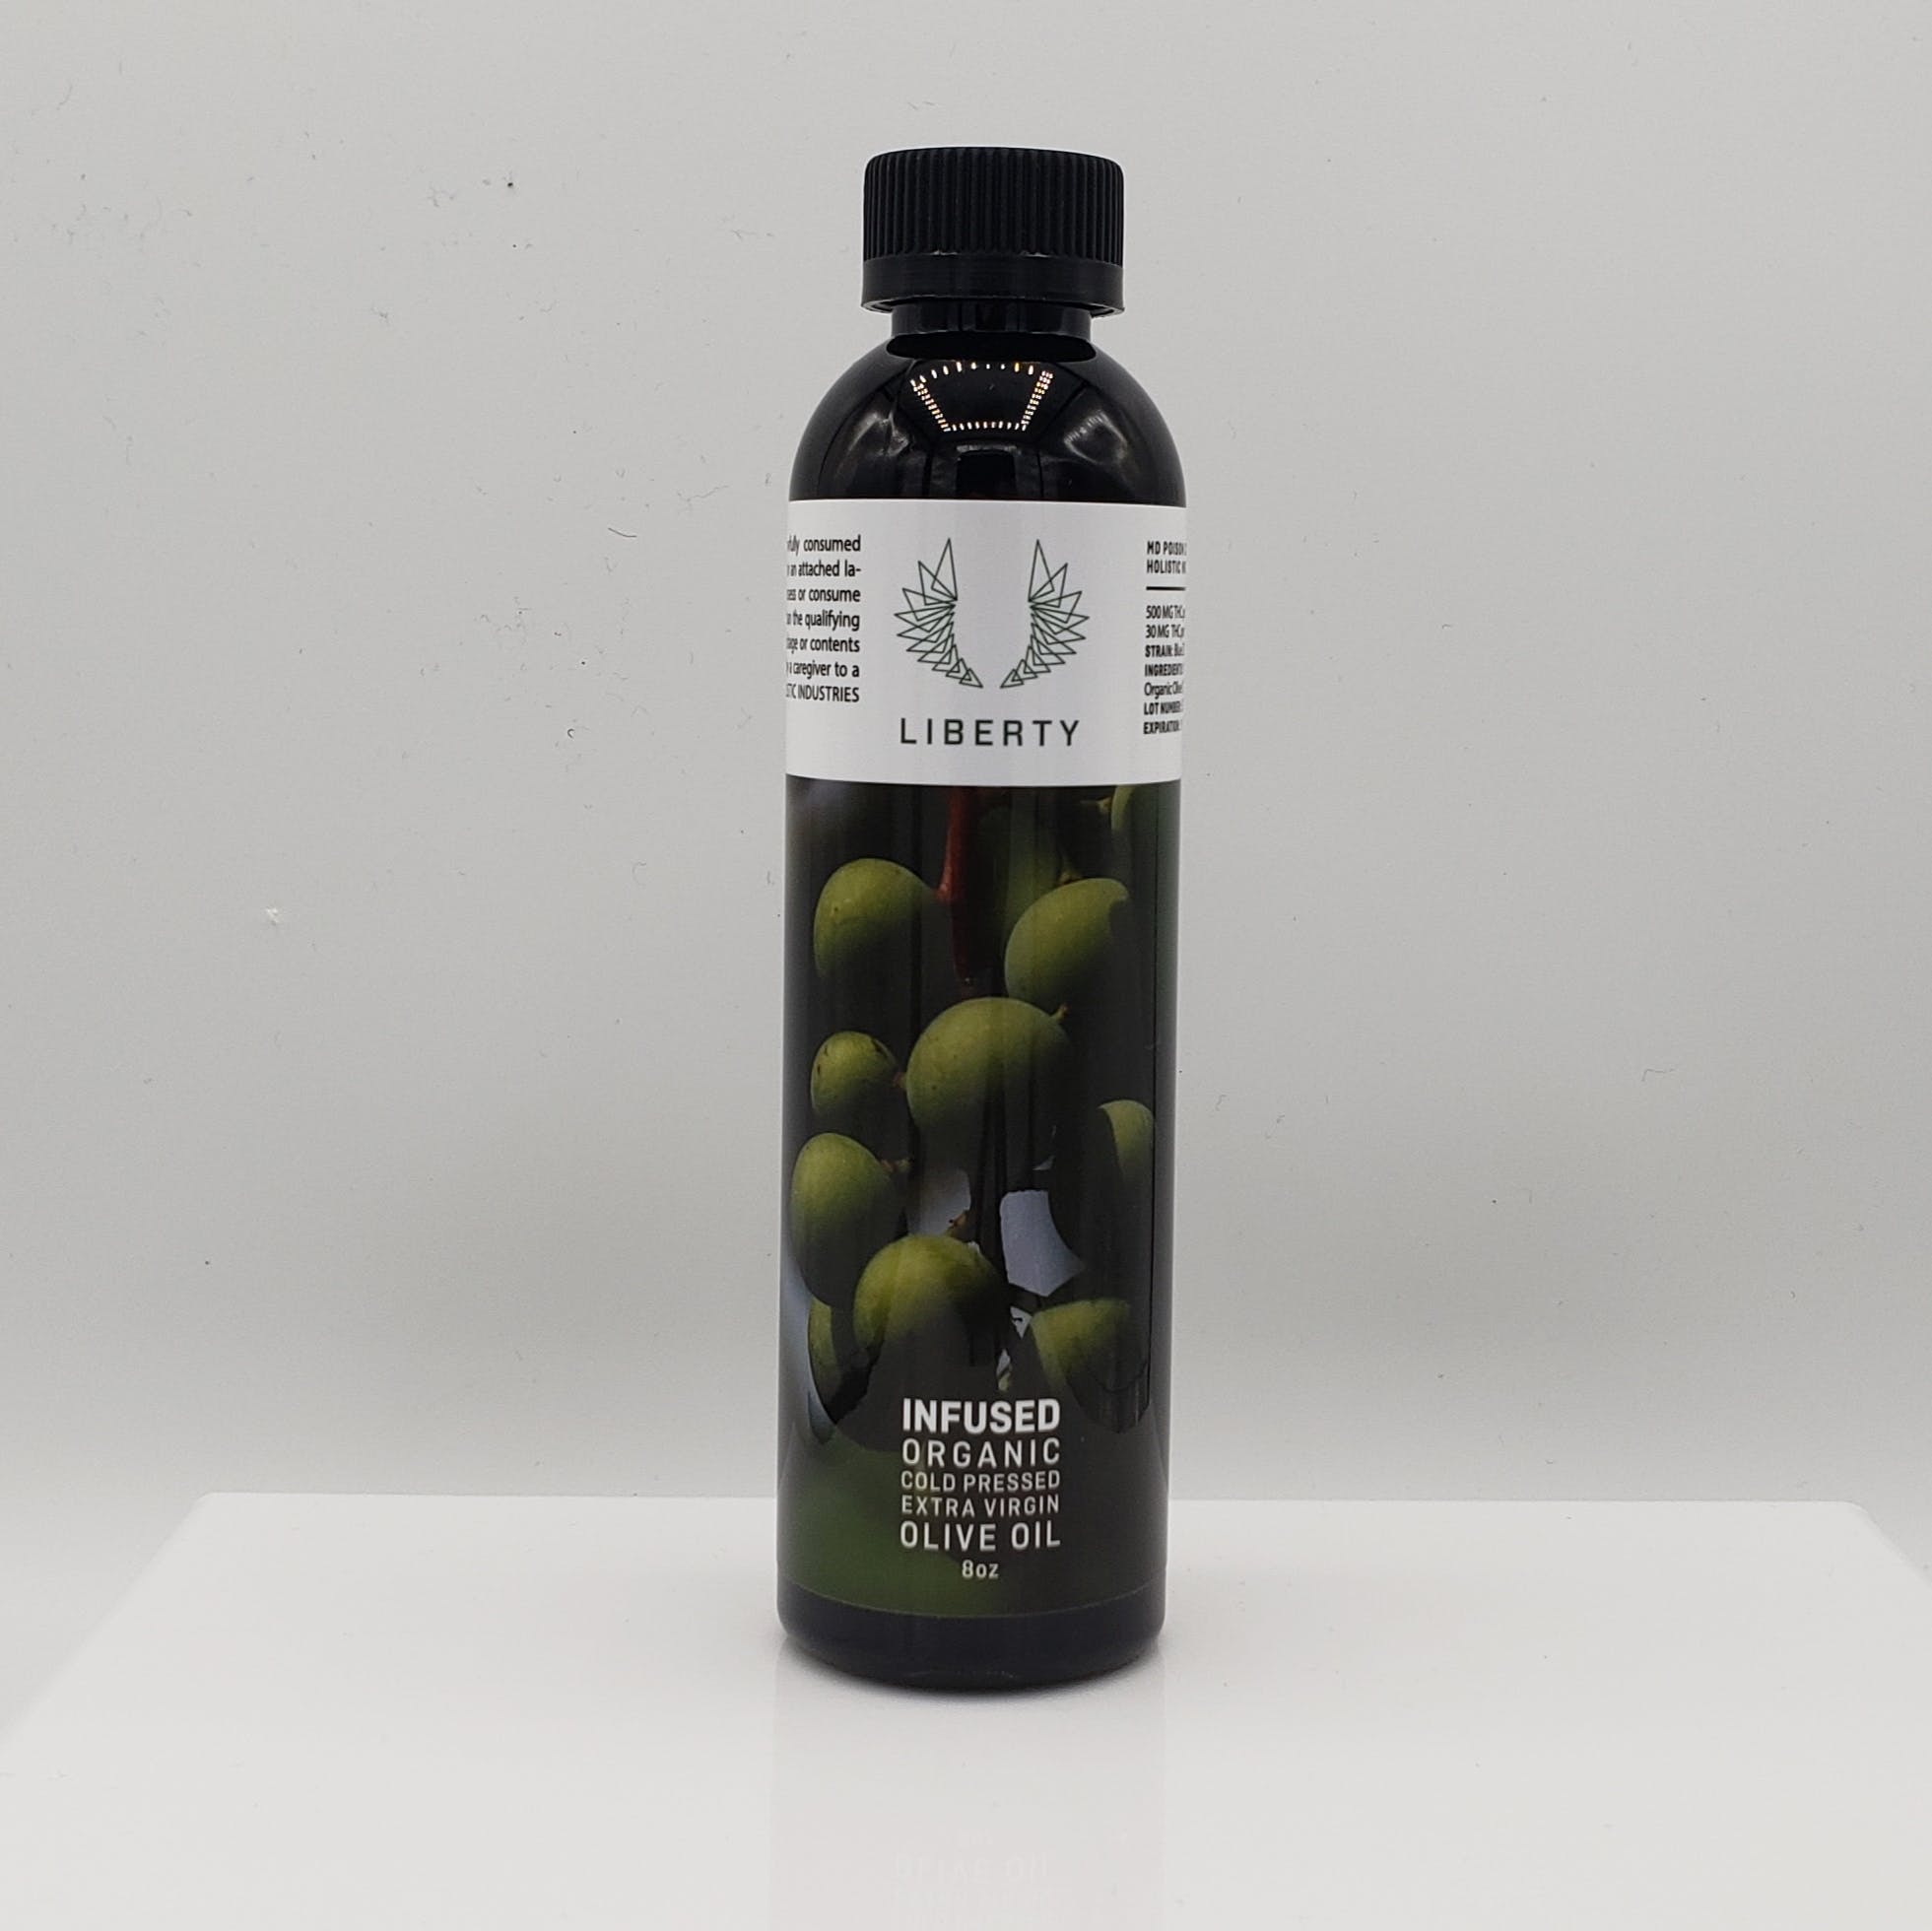 edible-liberty-infused-organic-cold-pressed-extra-virgin-olive-oil